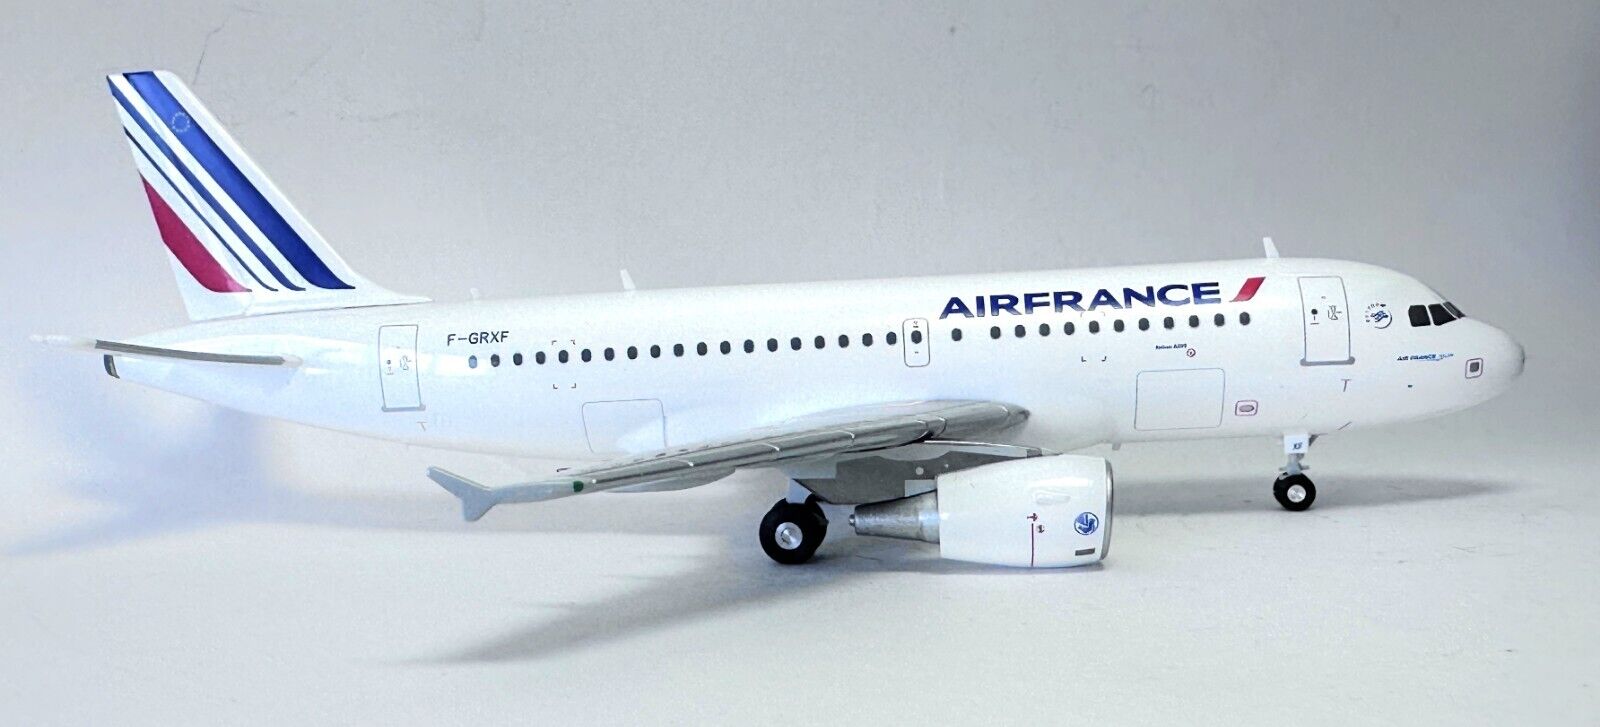 Airbus A319 Air France Premium Herpa Collectors Model Scale 1:200 555371 F-GRXF